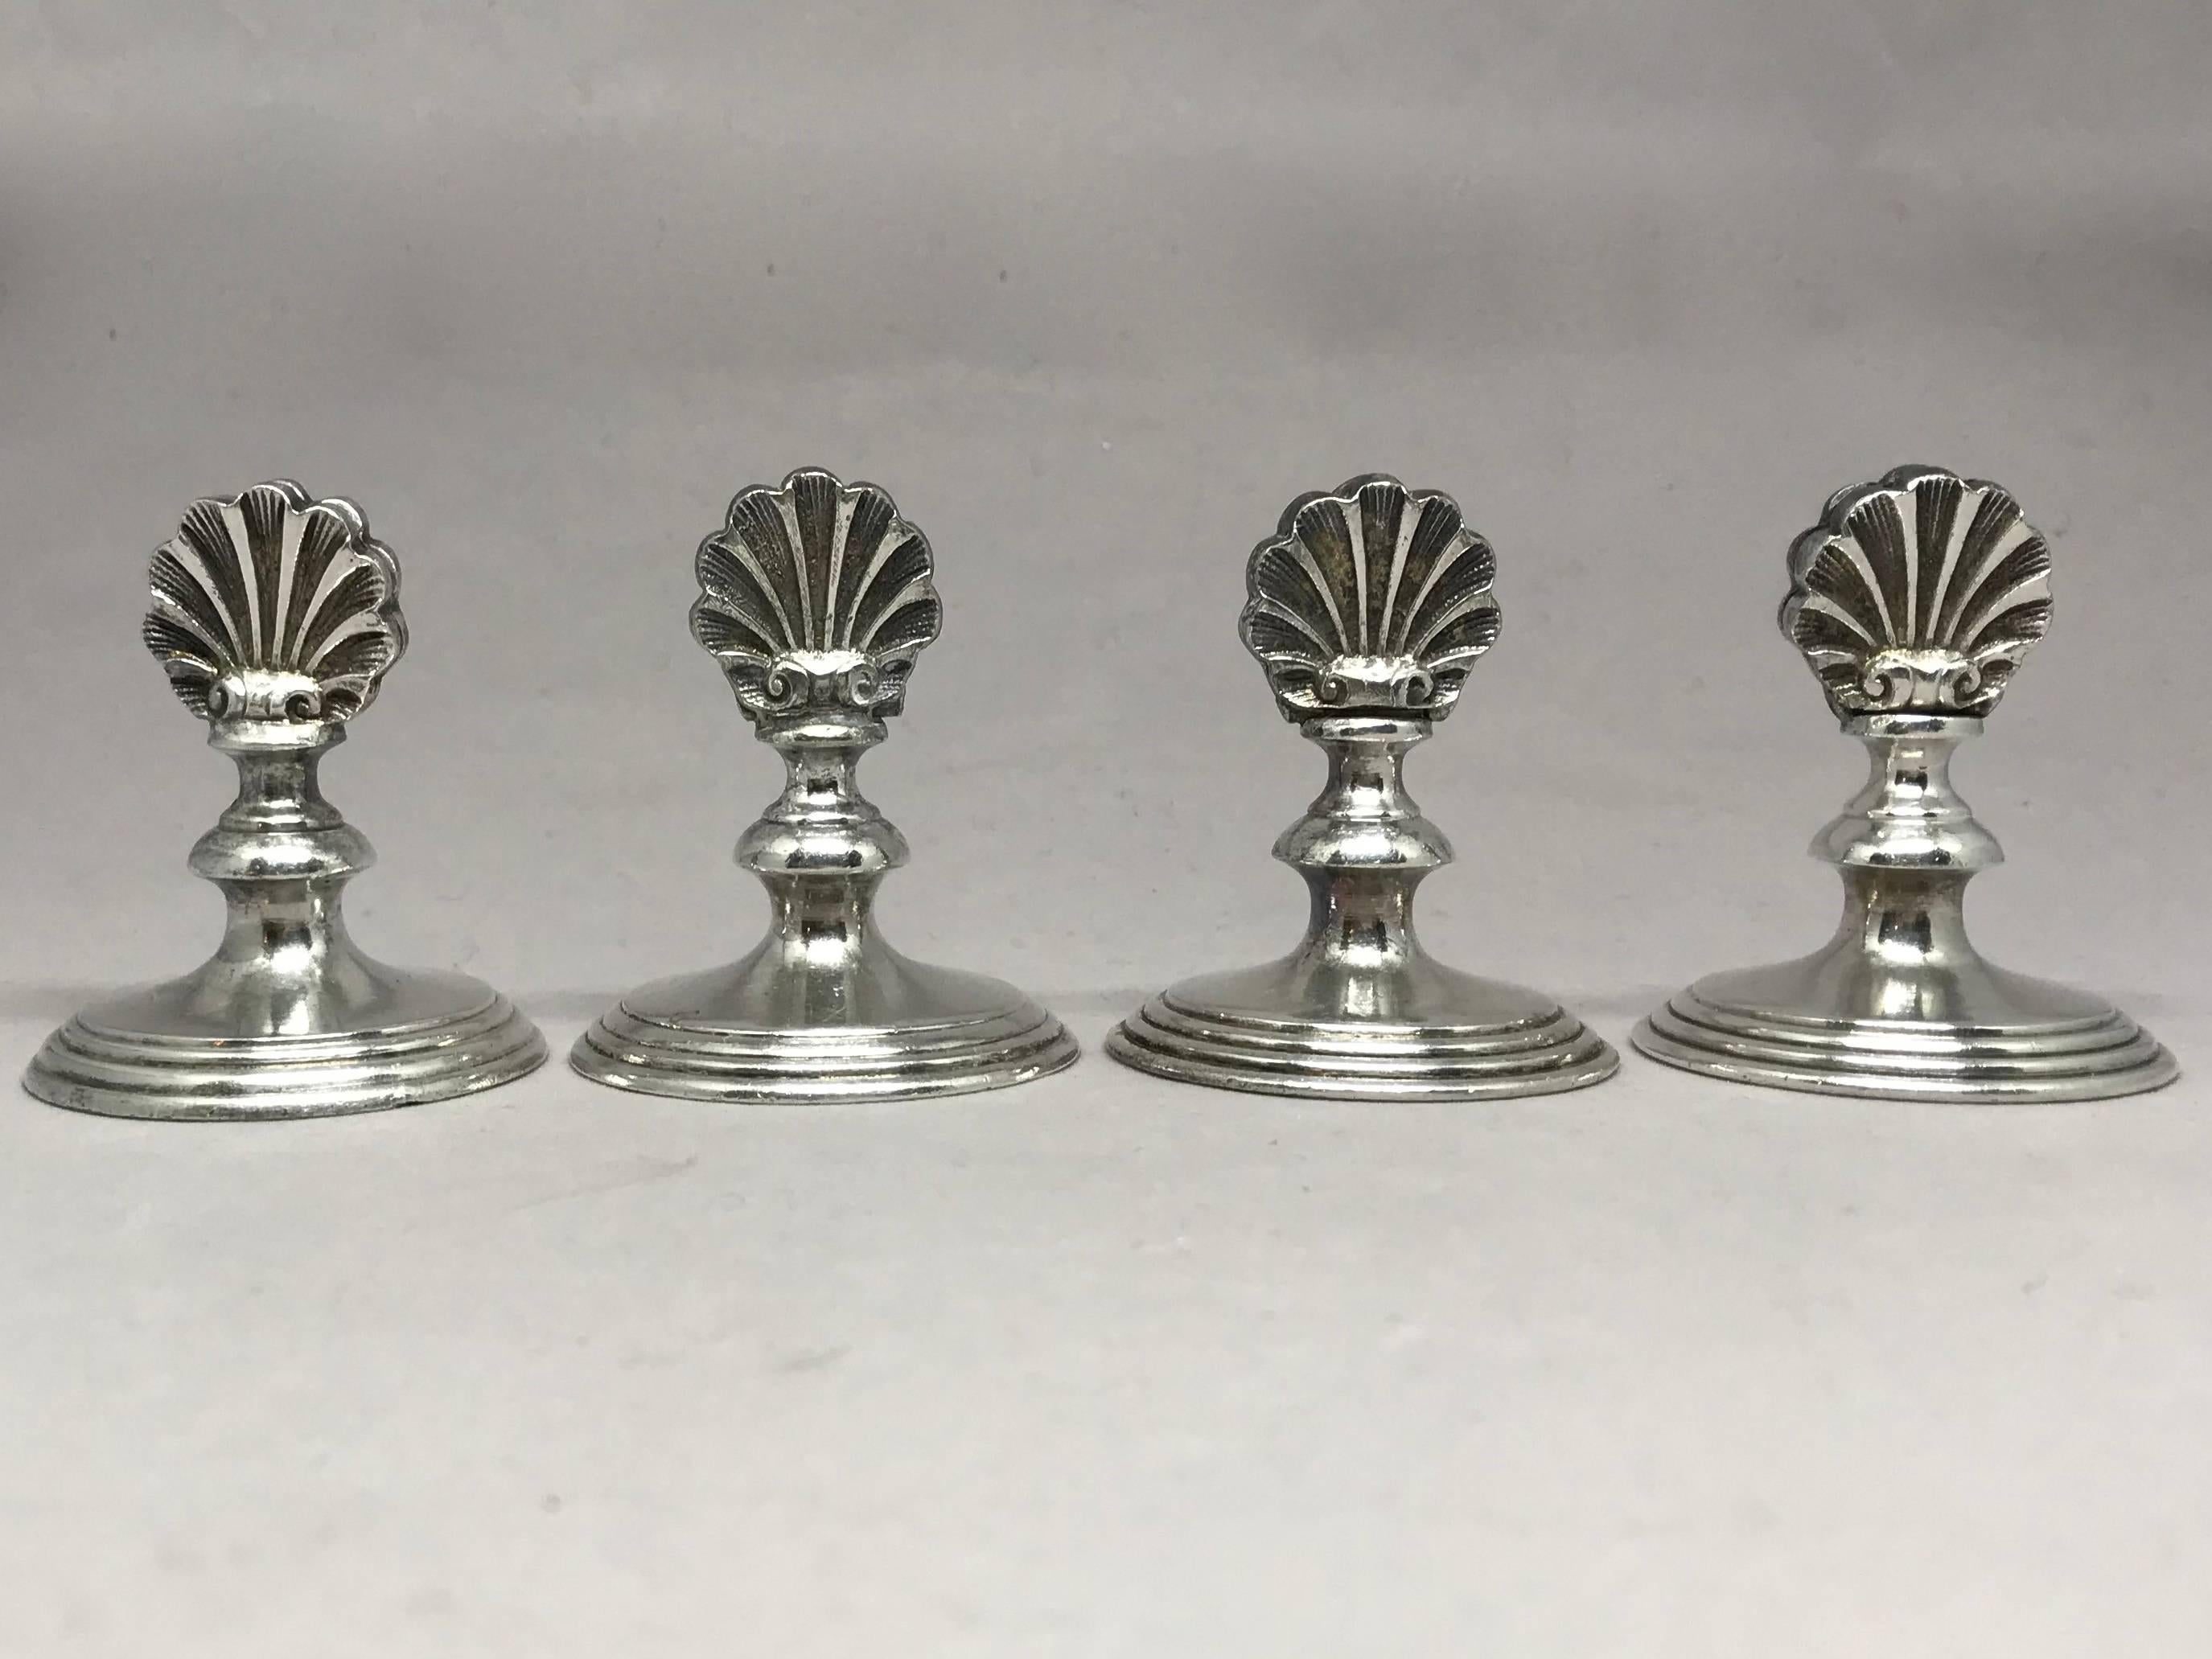 20th Century Austrian Hotel Silver Place Card Holders